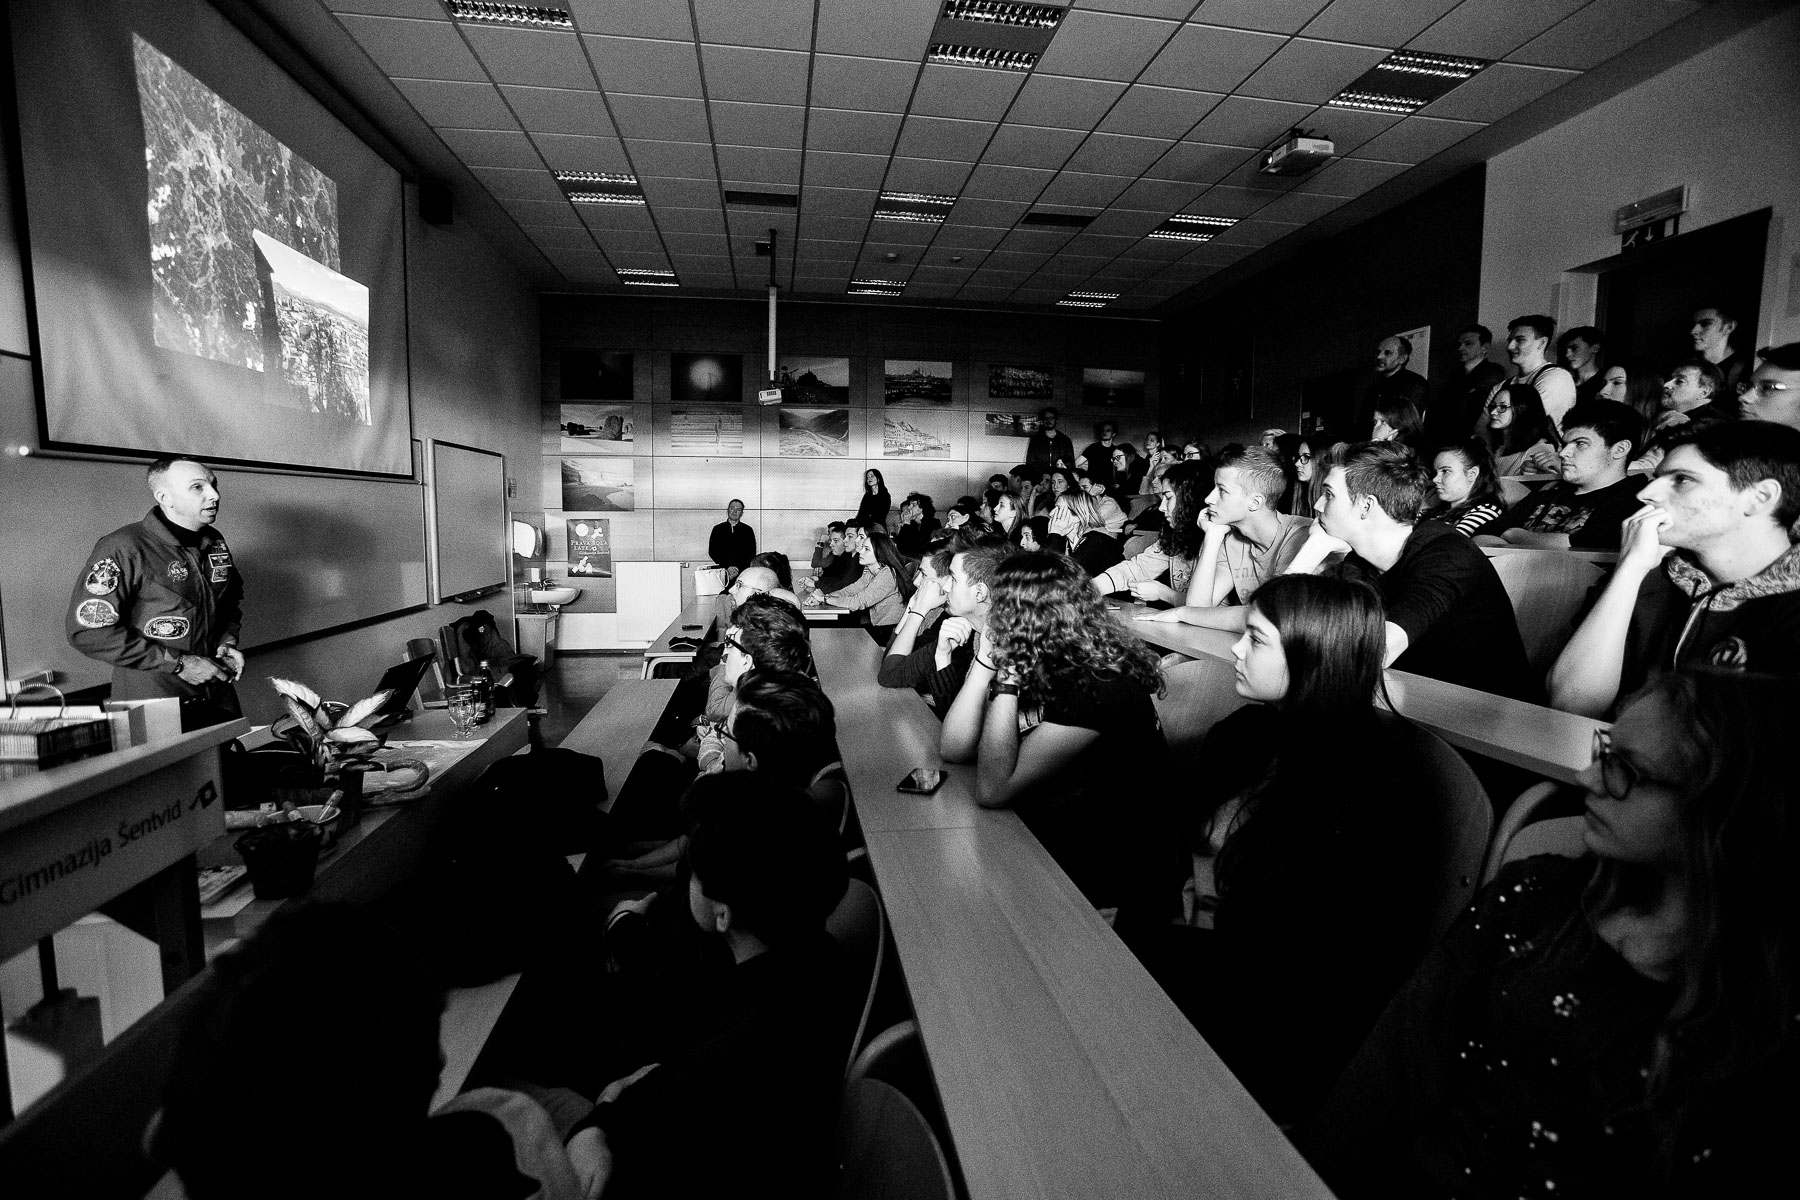 Randy gives a presentation of his time at the International Space Station to students at the Sentvid Highschool in Ljubljana.